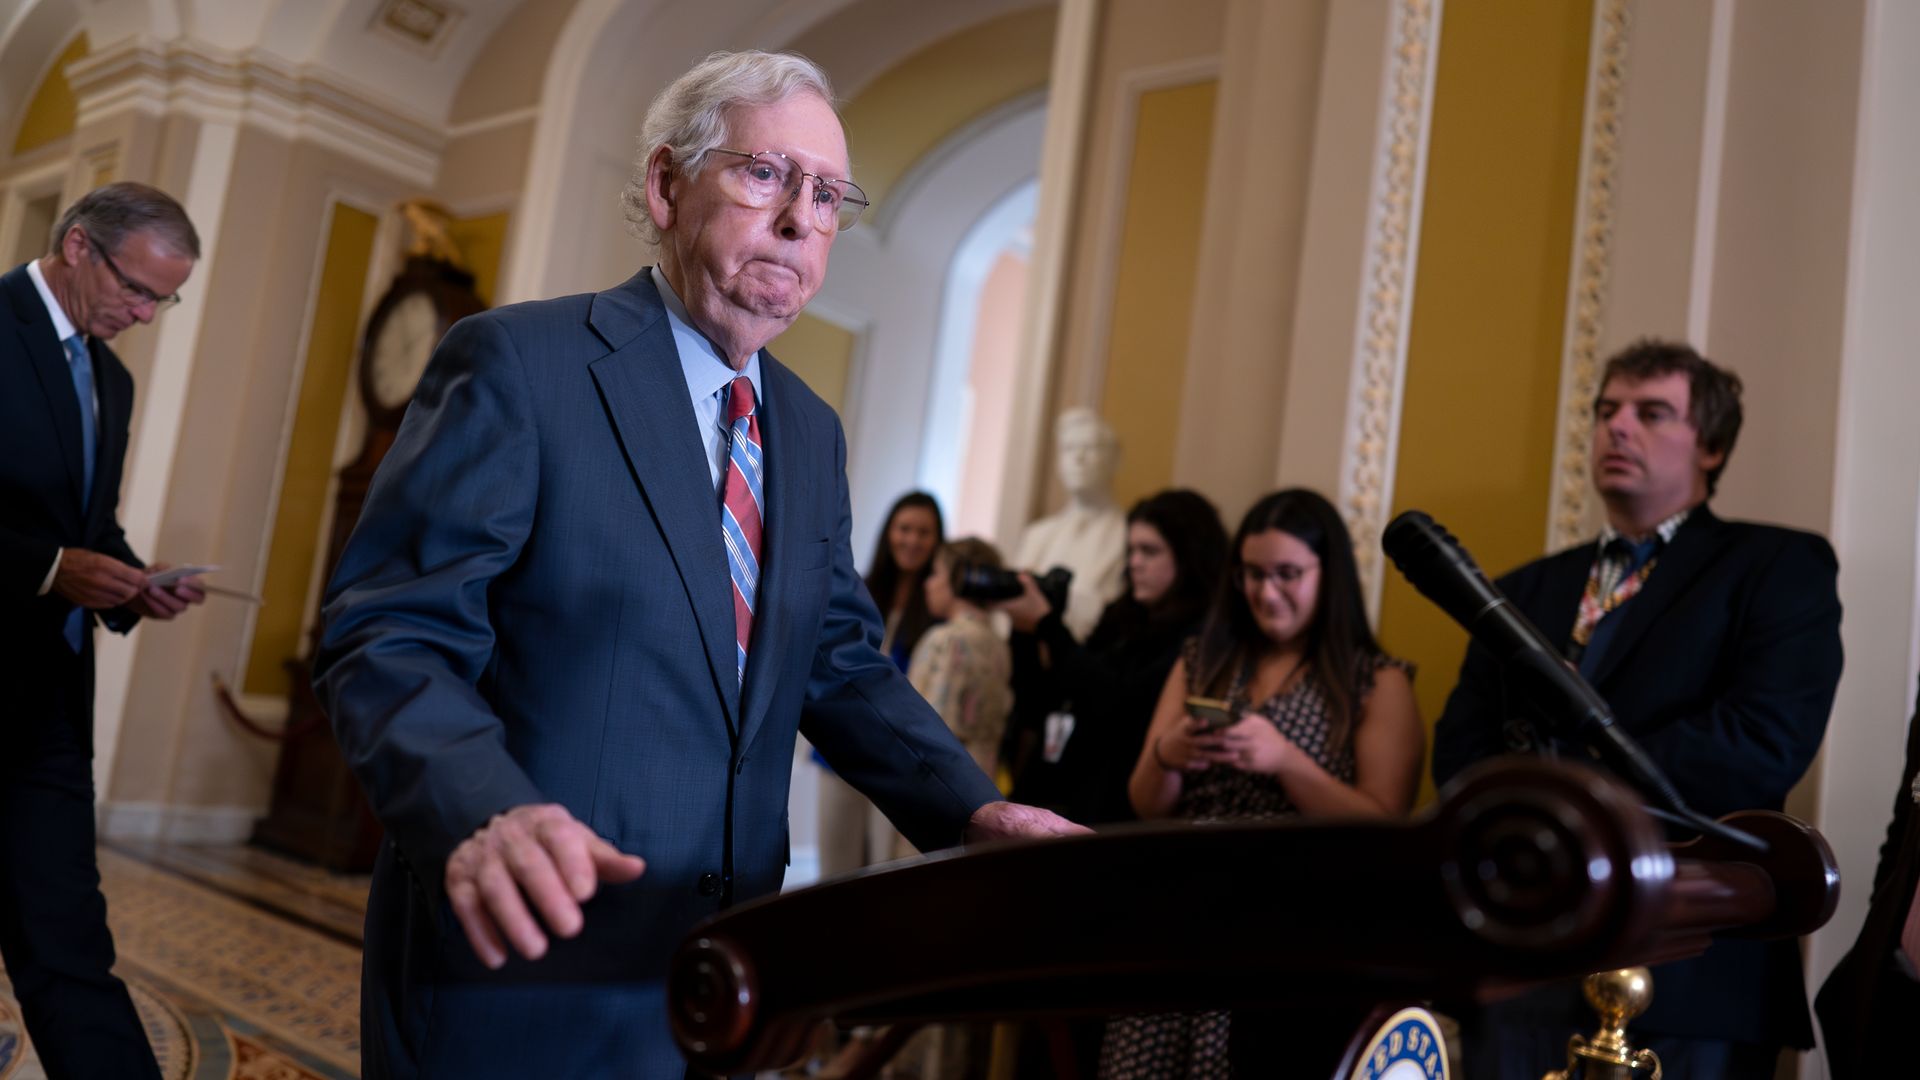 Senator Mitch McConnell's recent health concerns, including a major concussion and "freezing" episodes, are no laughing matter.